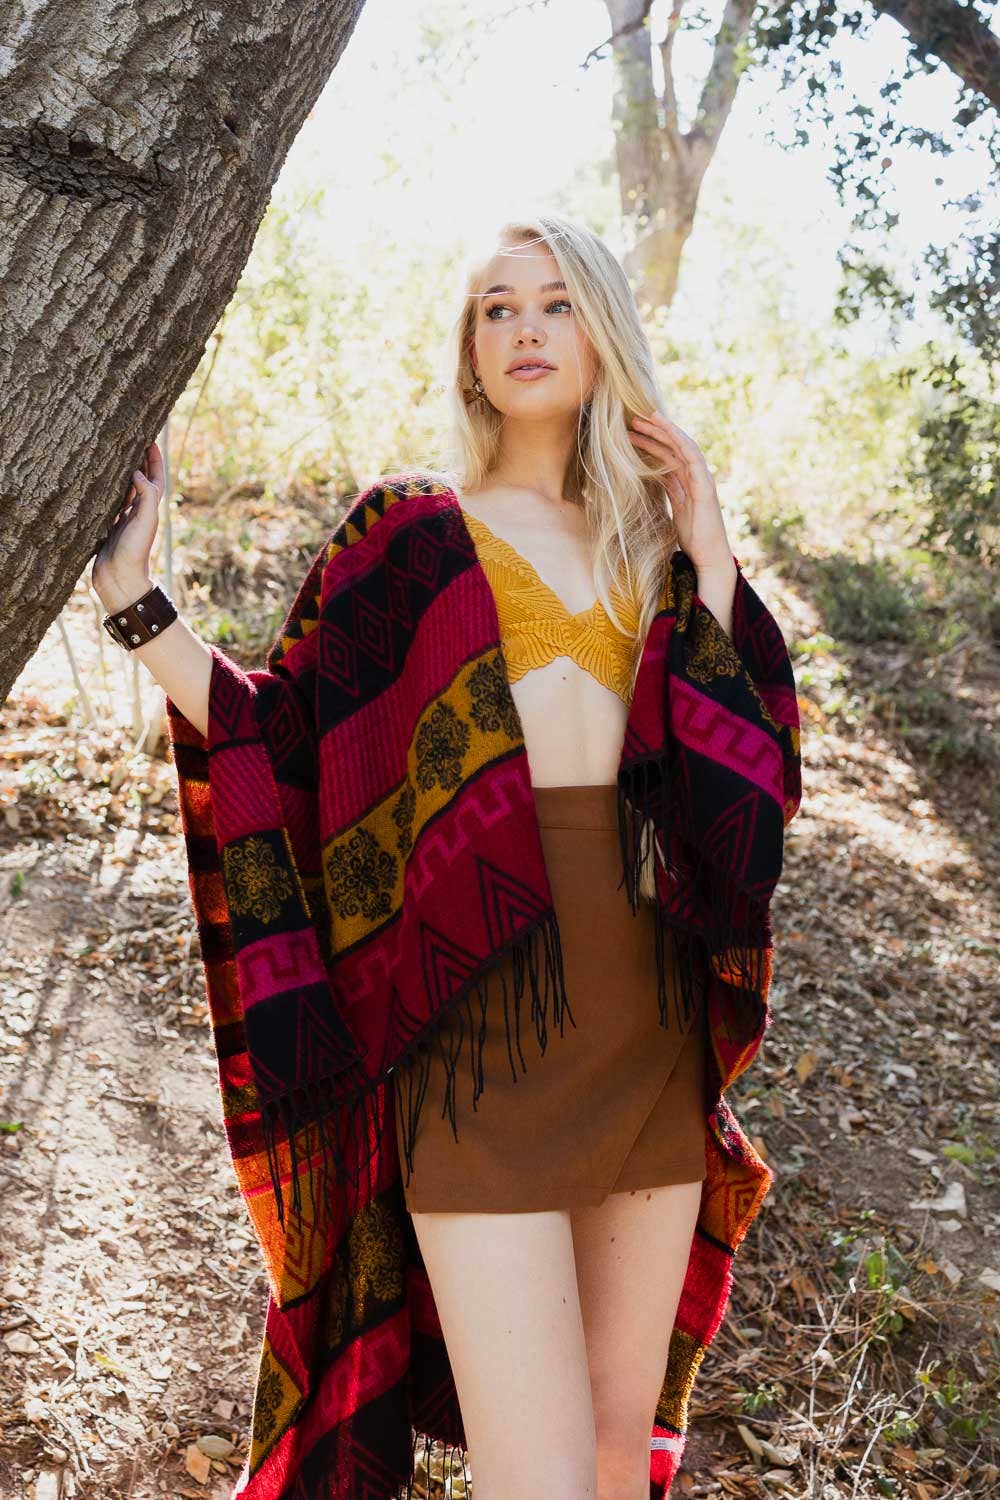 model is pictured outdoors wearing an Aztec-printed poncho